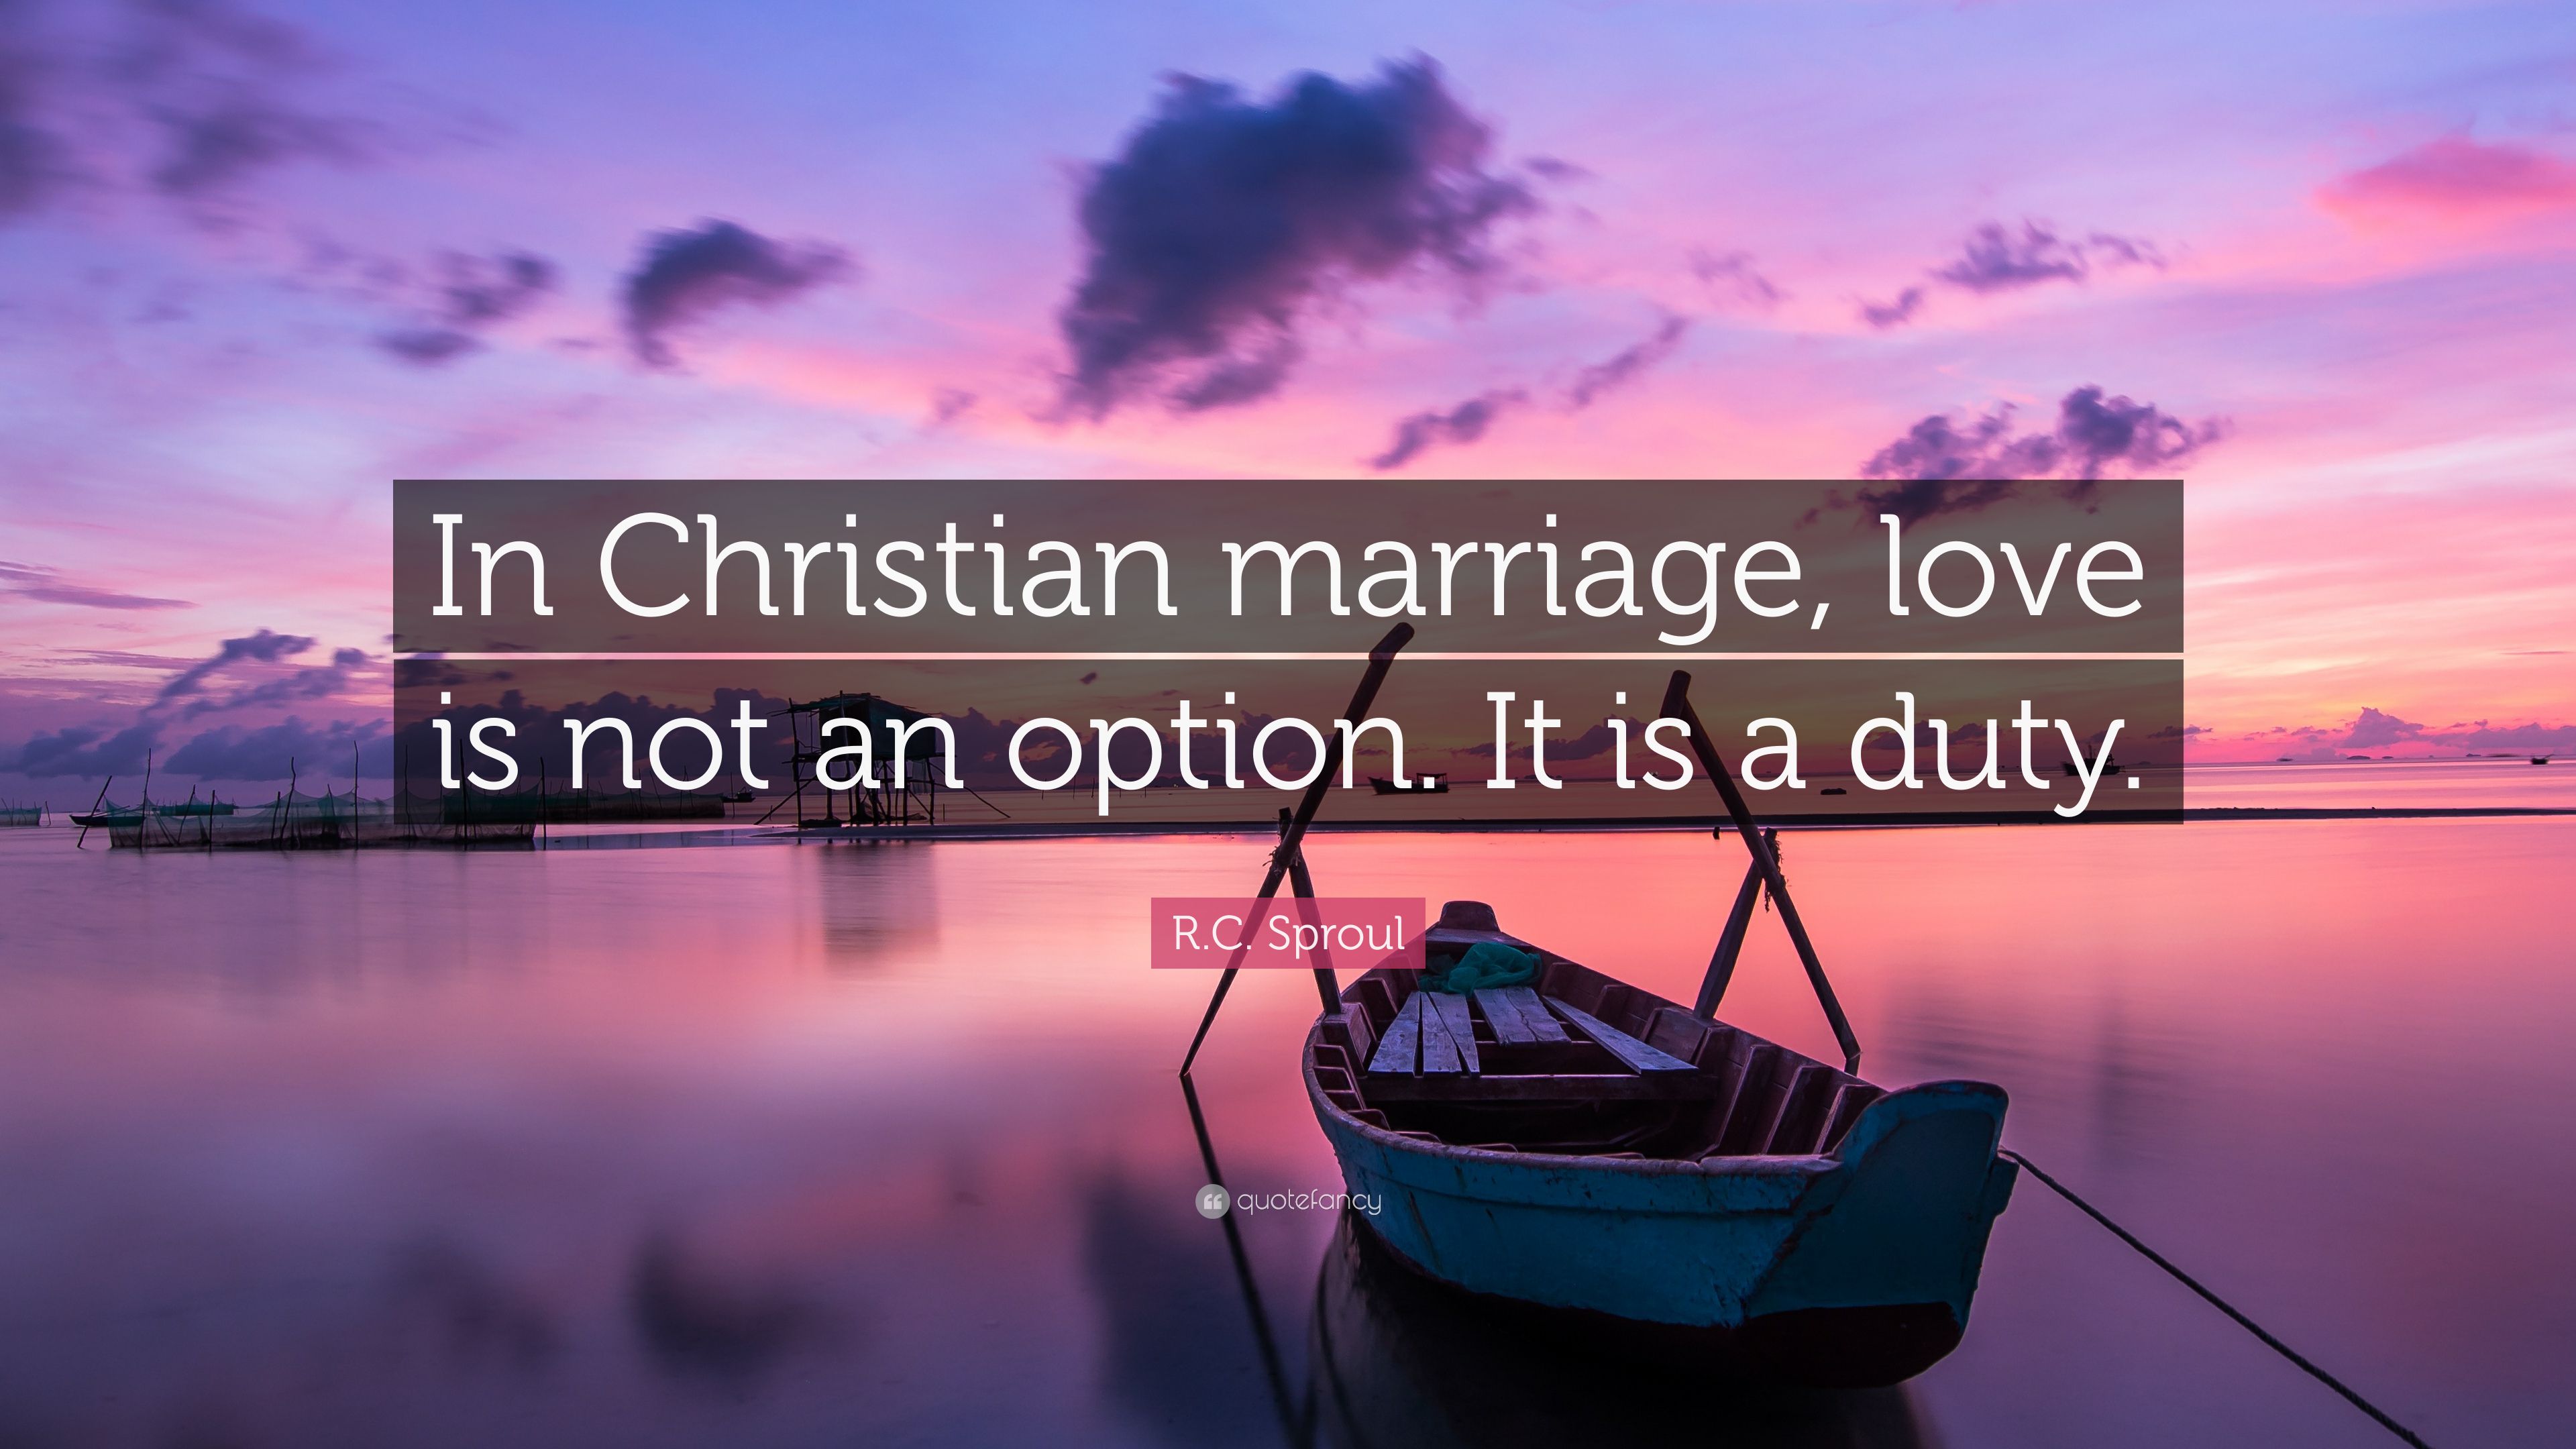 R.C. Sproul Quote: “In Christian marriage, love is not an option